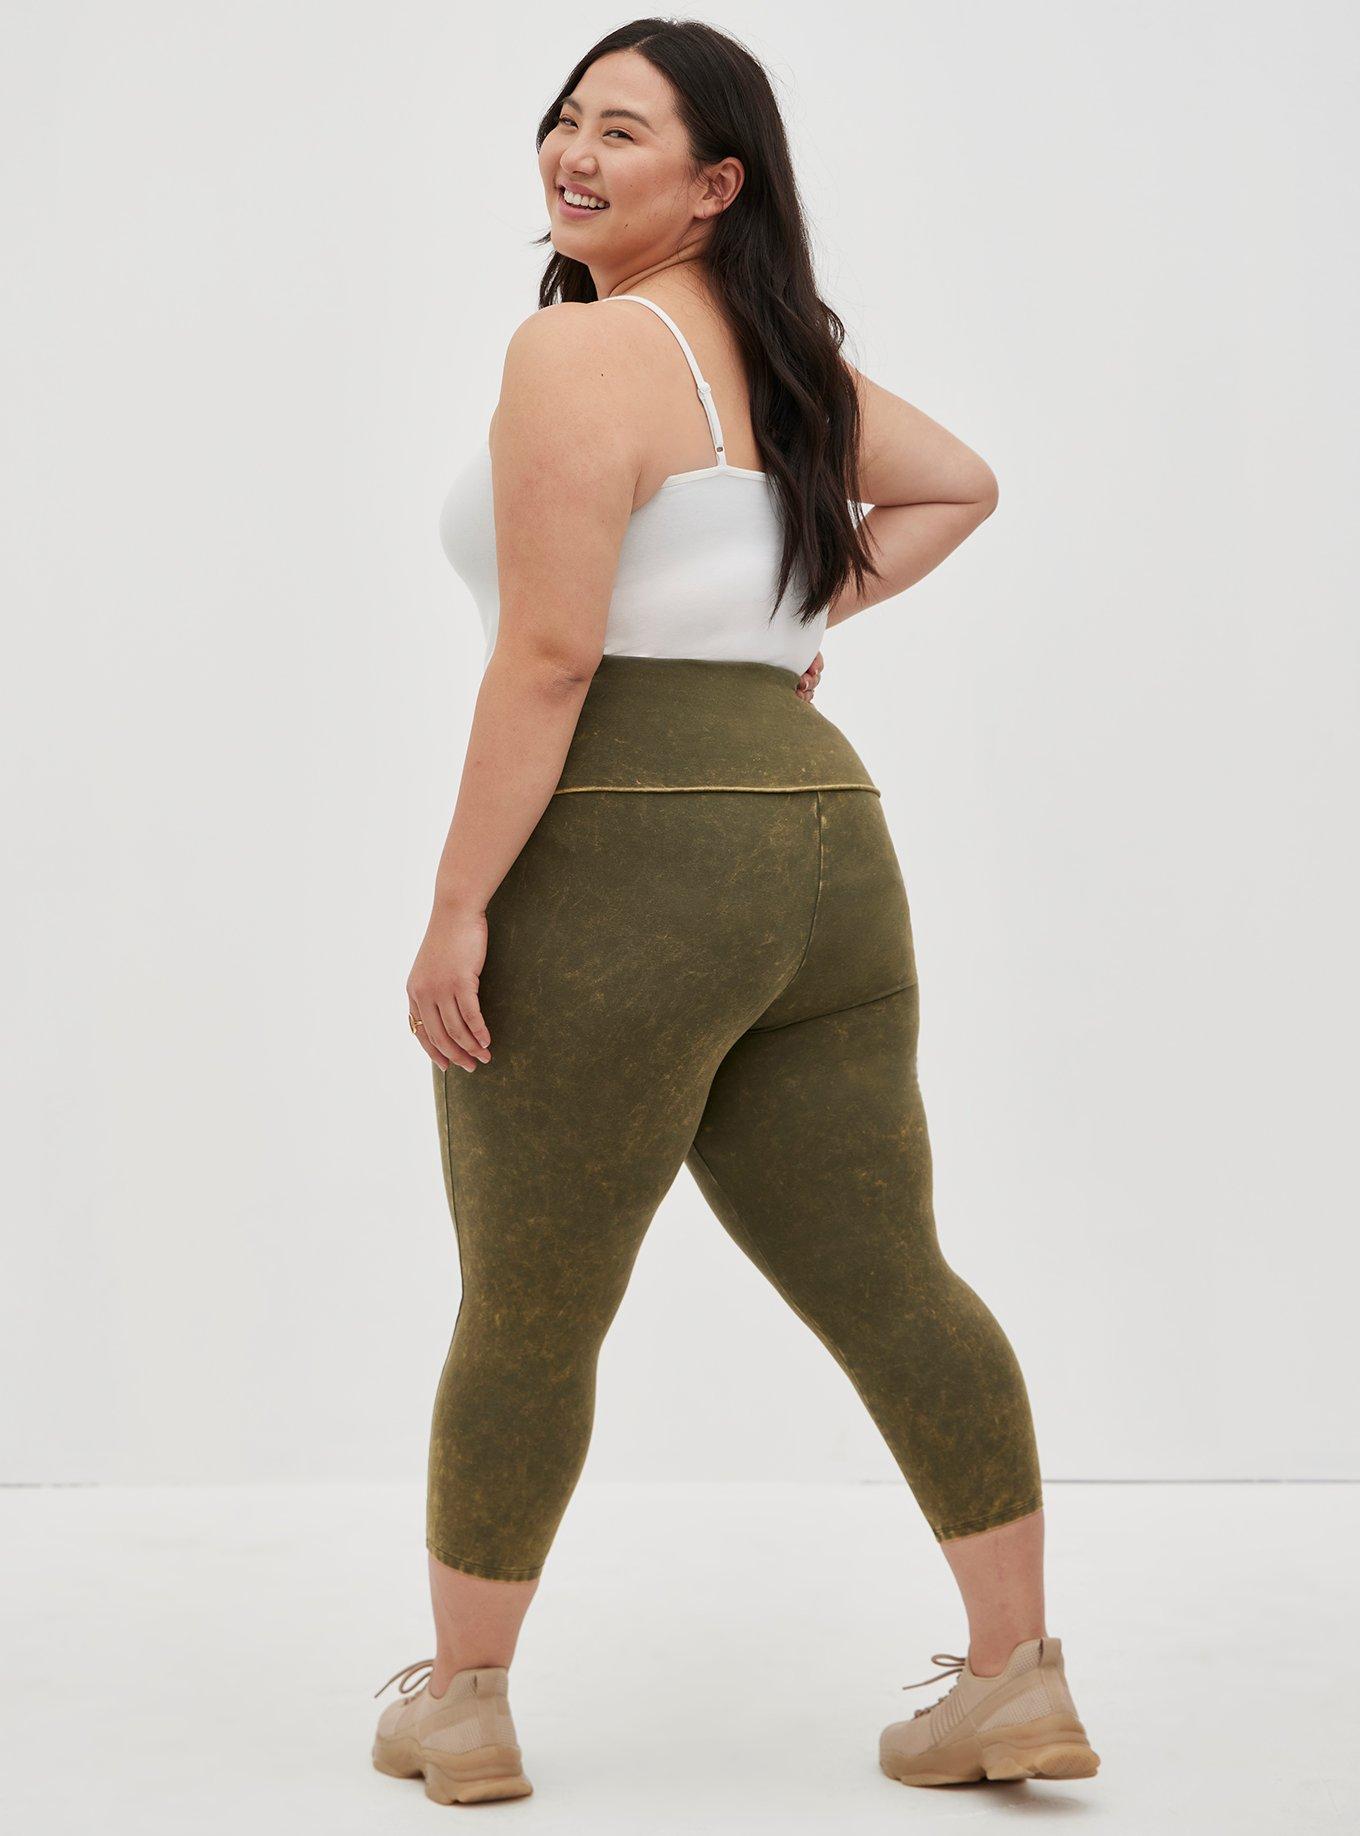 Torrid Leggings 1X (14-16) Olive Army Green Cropped Plus Size